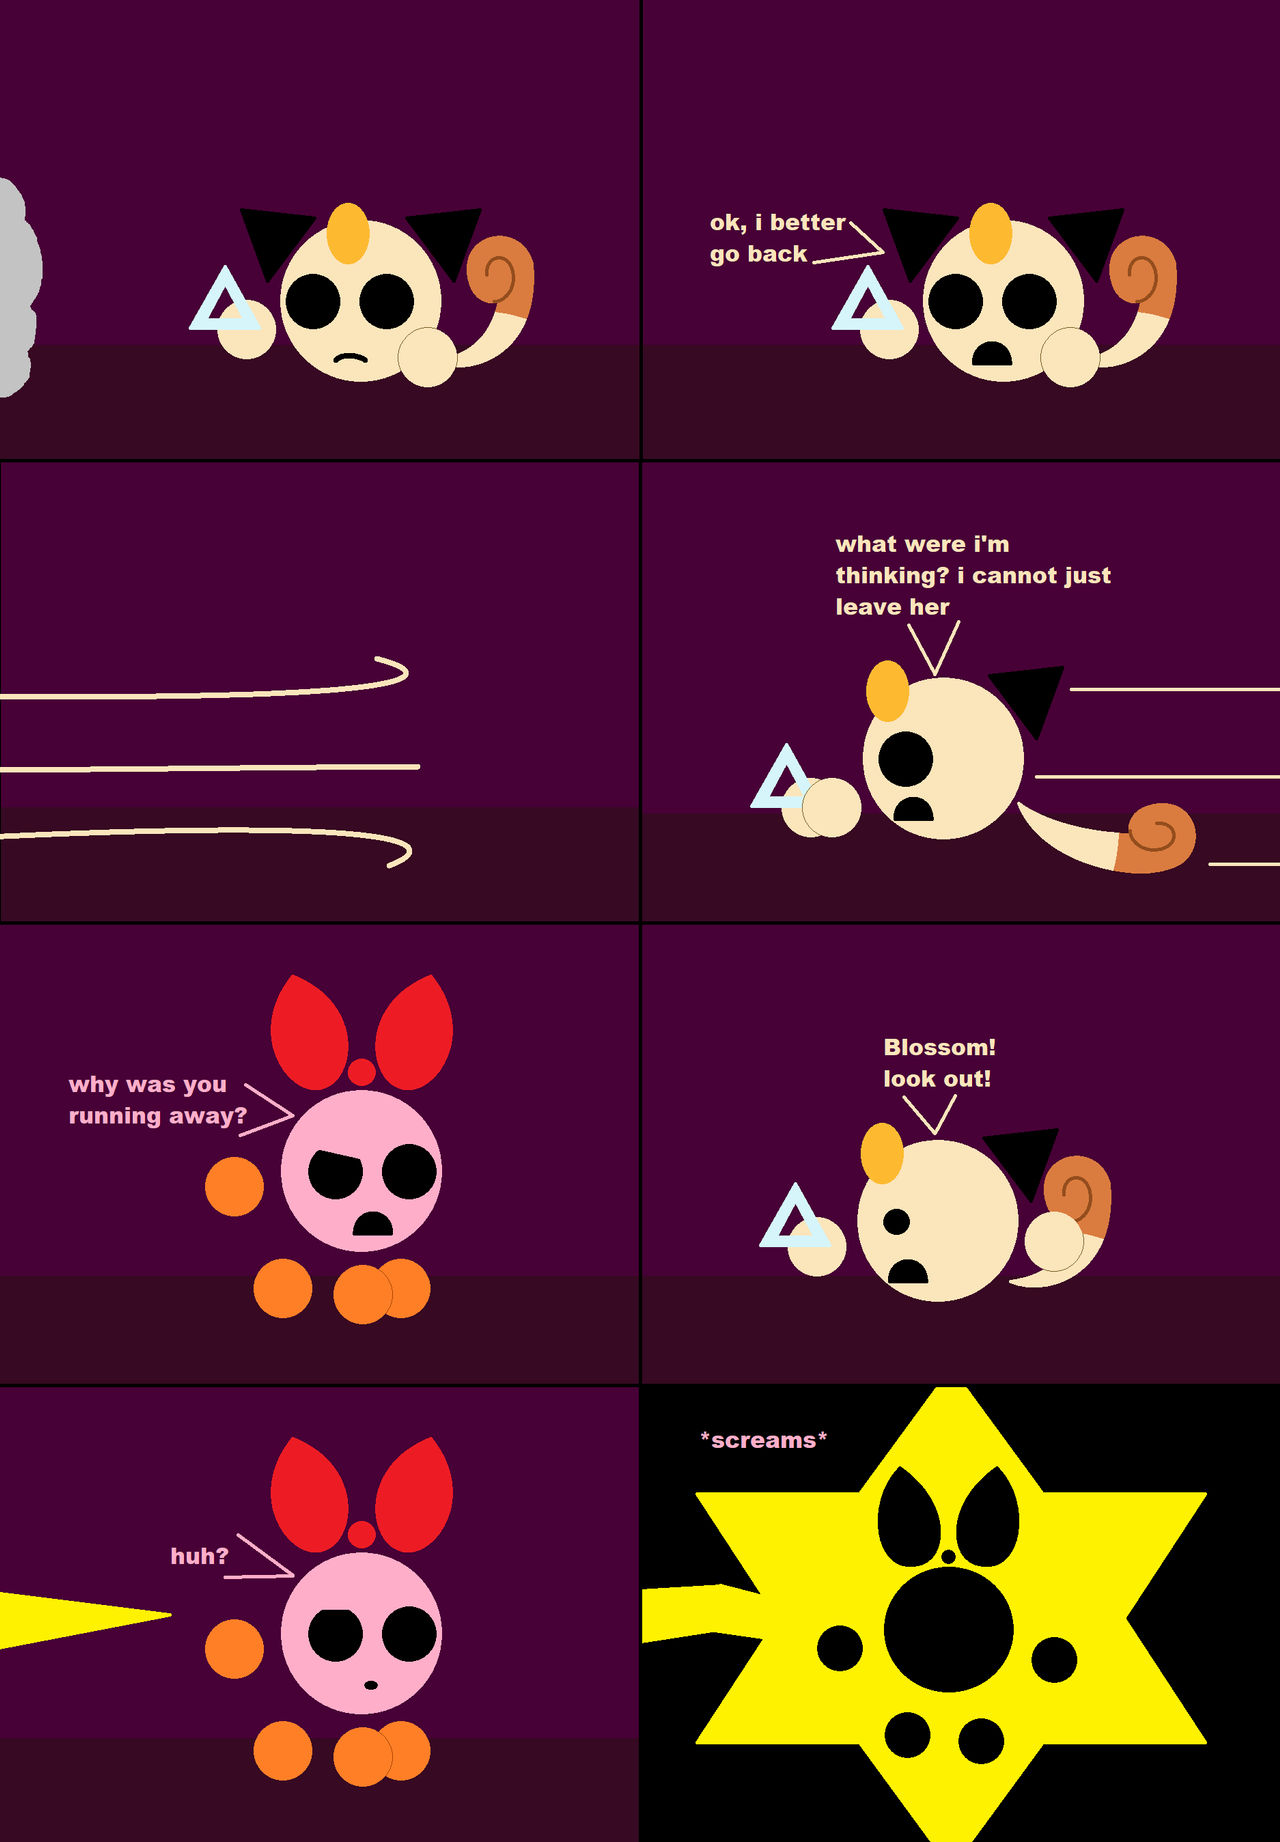 starilign and jsab worlds unite page 163 by Linedol on DeviantArt